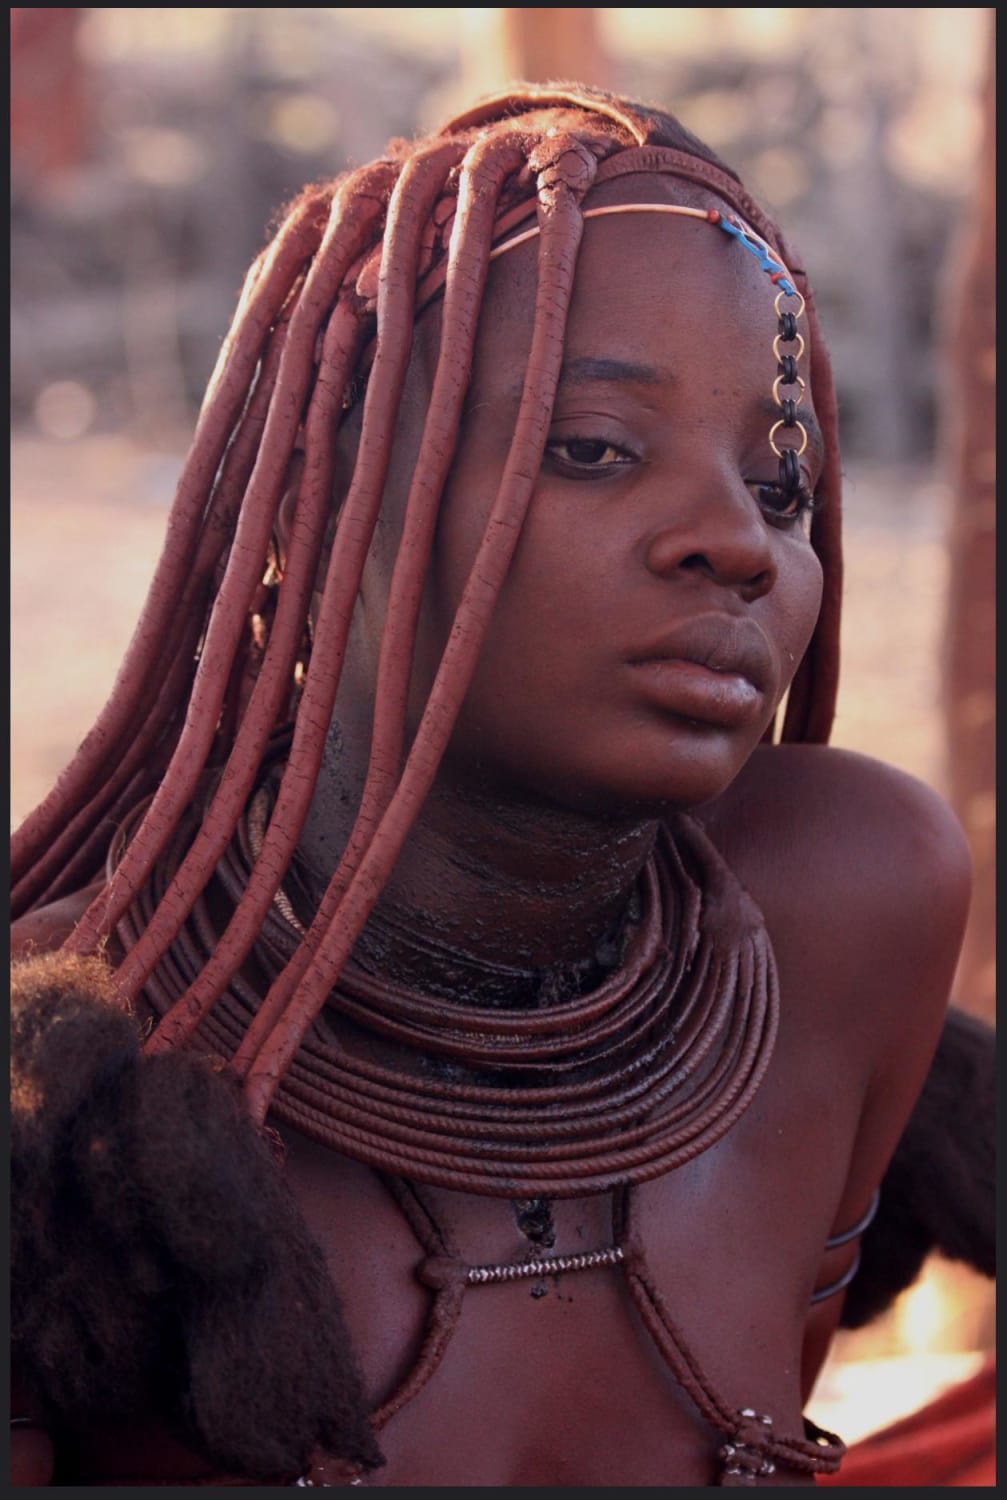 Himba woman. The Himba are indigenous peoples with an estimated population of about 50,000 people living in northern Namibia, in the Kunene Region and on the other side of the Kunene River in southern Angola.